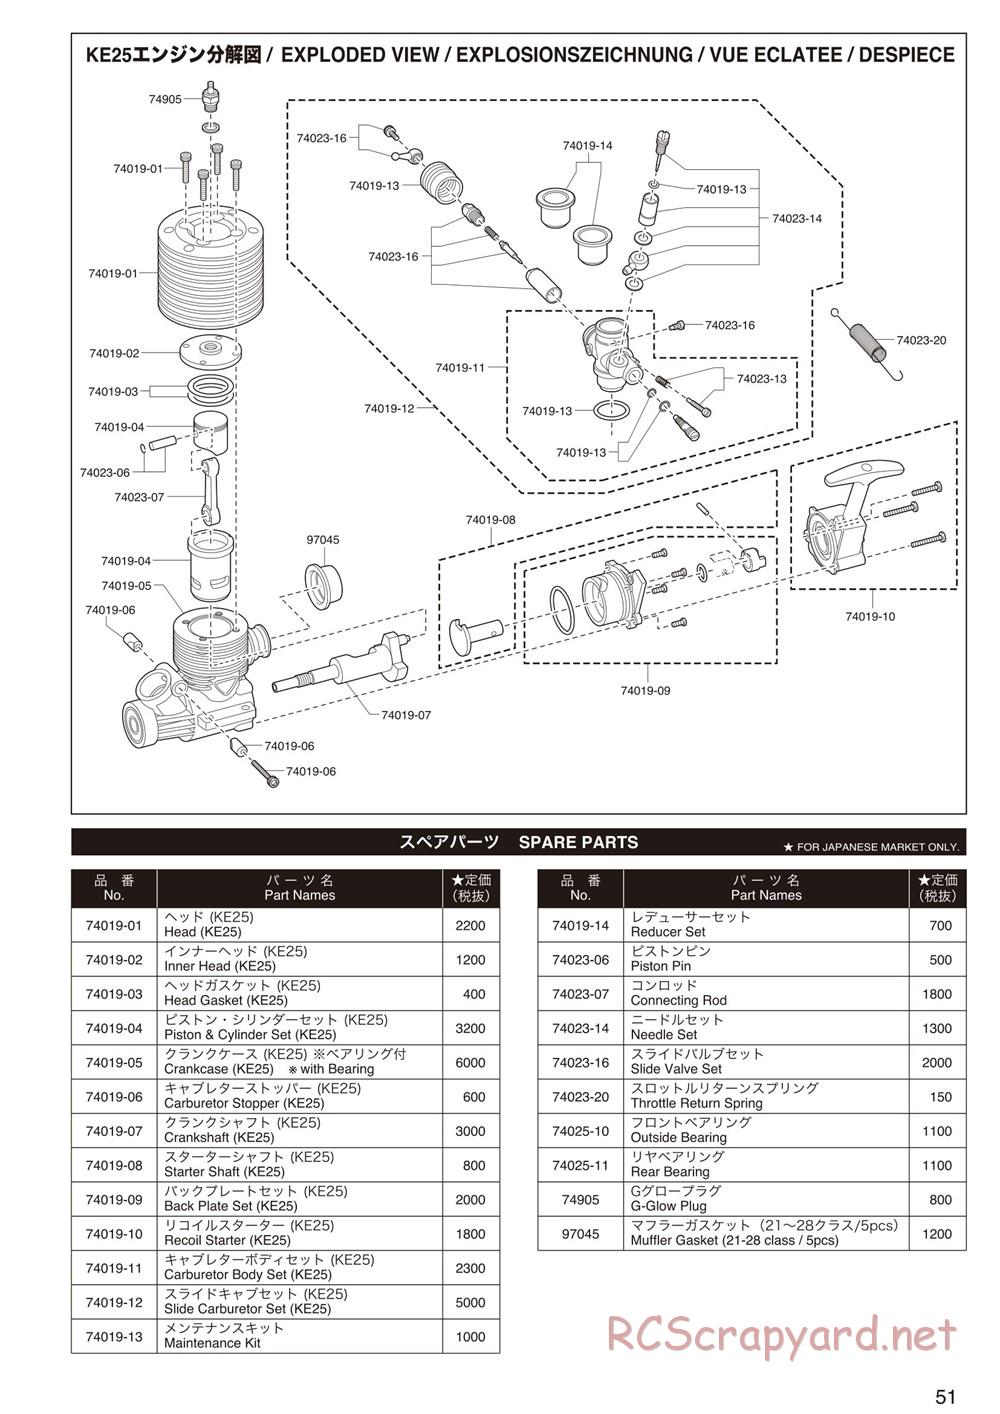 Kyosho - Mad Force Kruiser 2.0 - Manual - Page 50